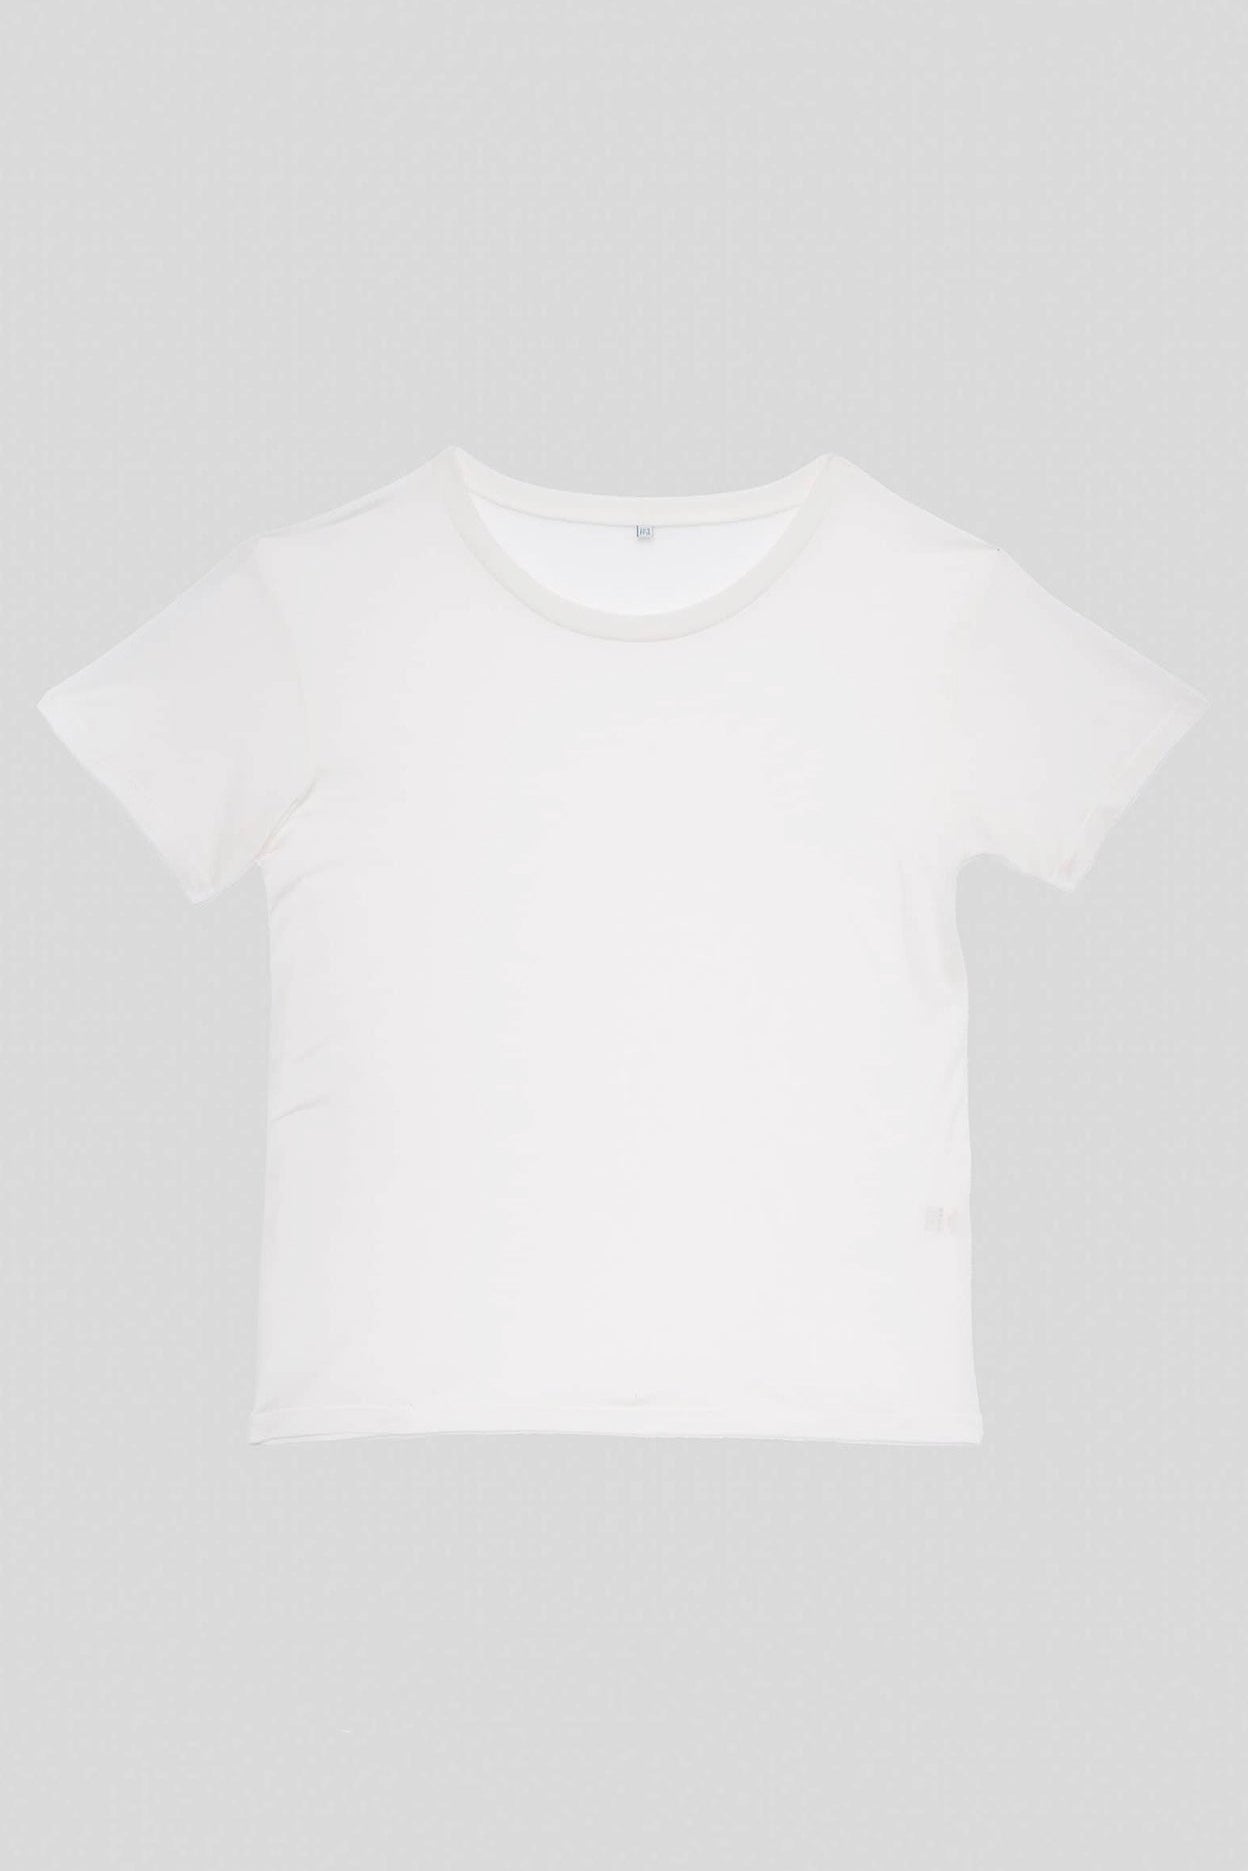 Loose Tee Shirt in Undyed by Baserange